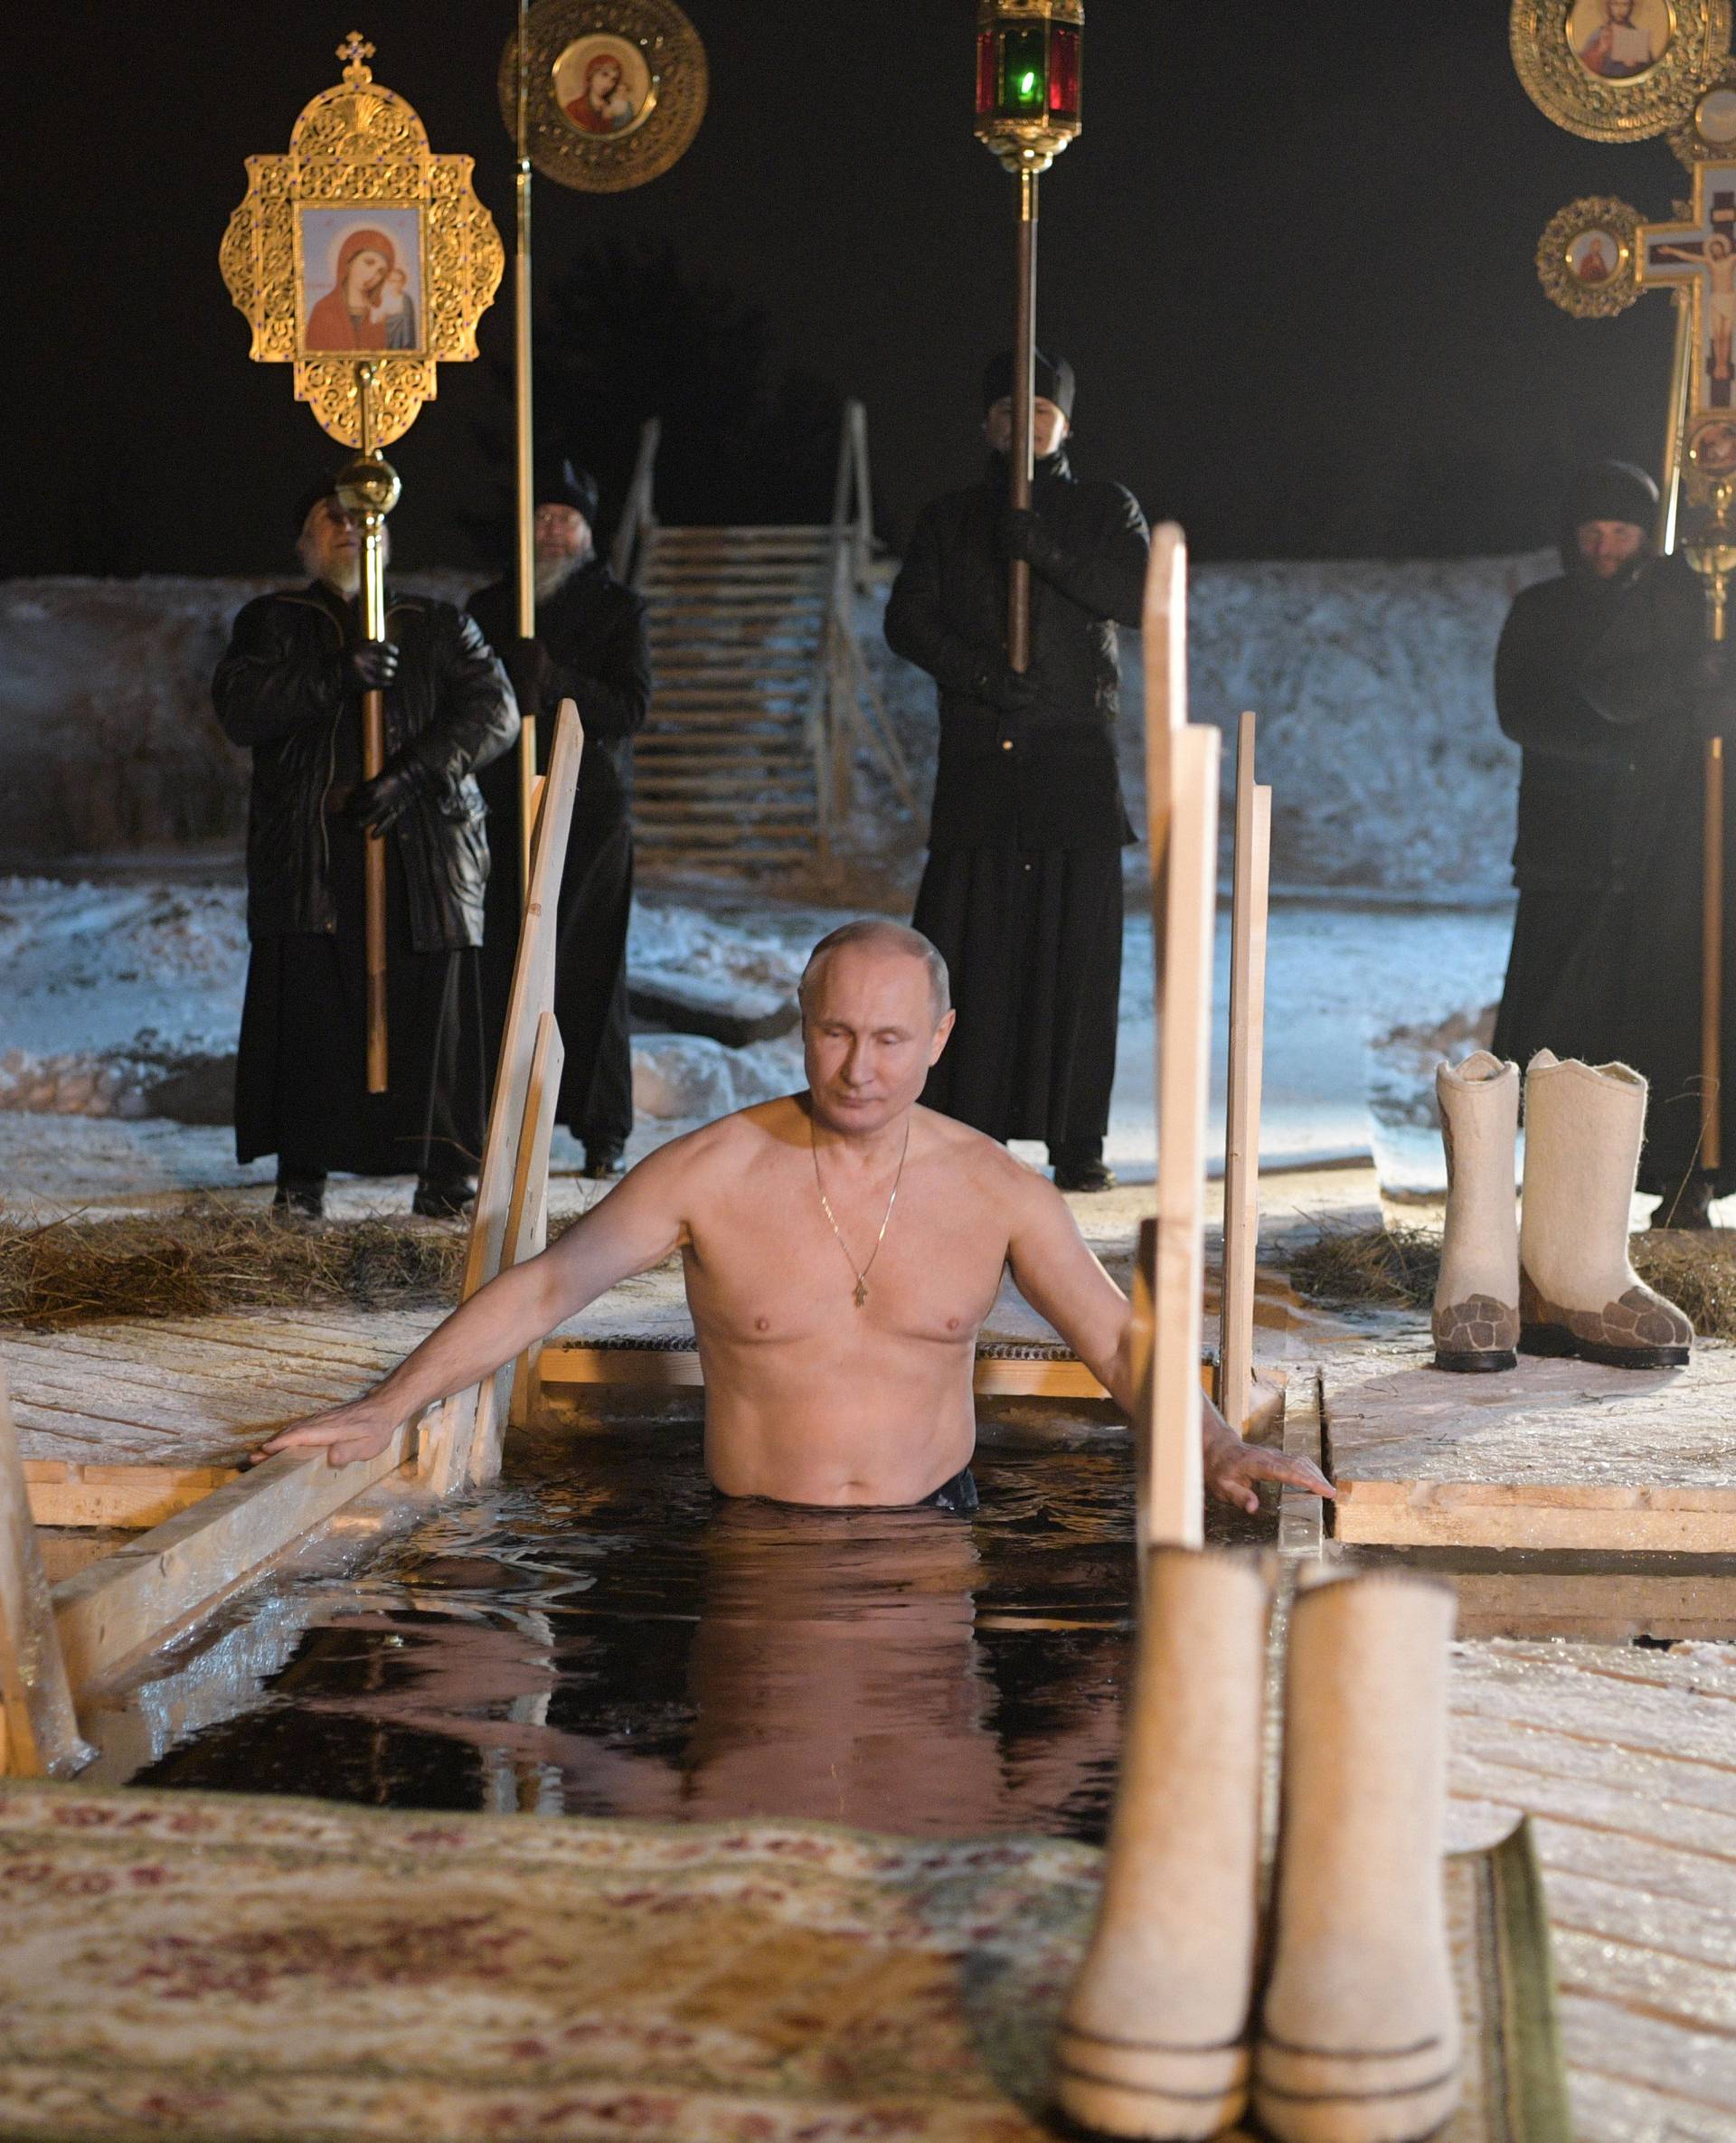 Russian President Vladimir Putin takes a dip in the water during Orthodox Epiphany celebrations at lake Seliger, Tver region